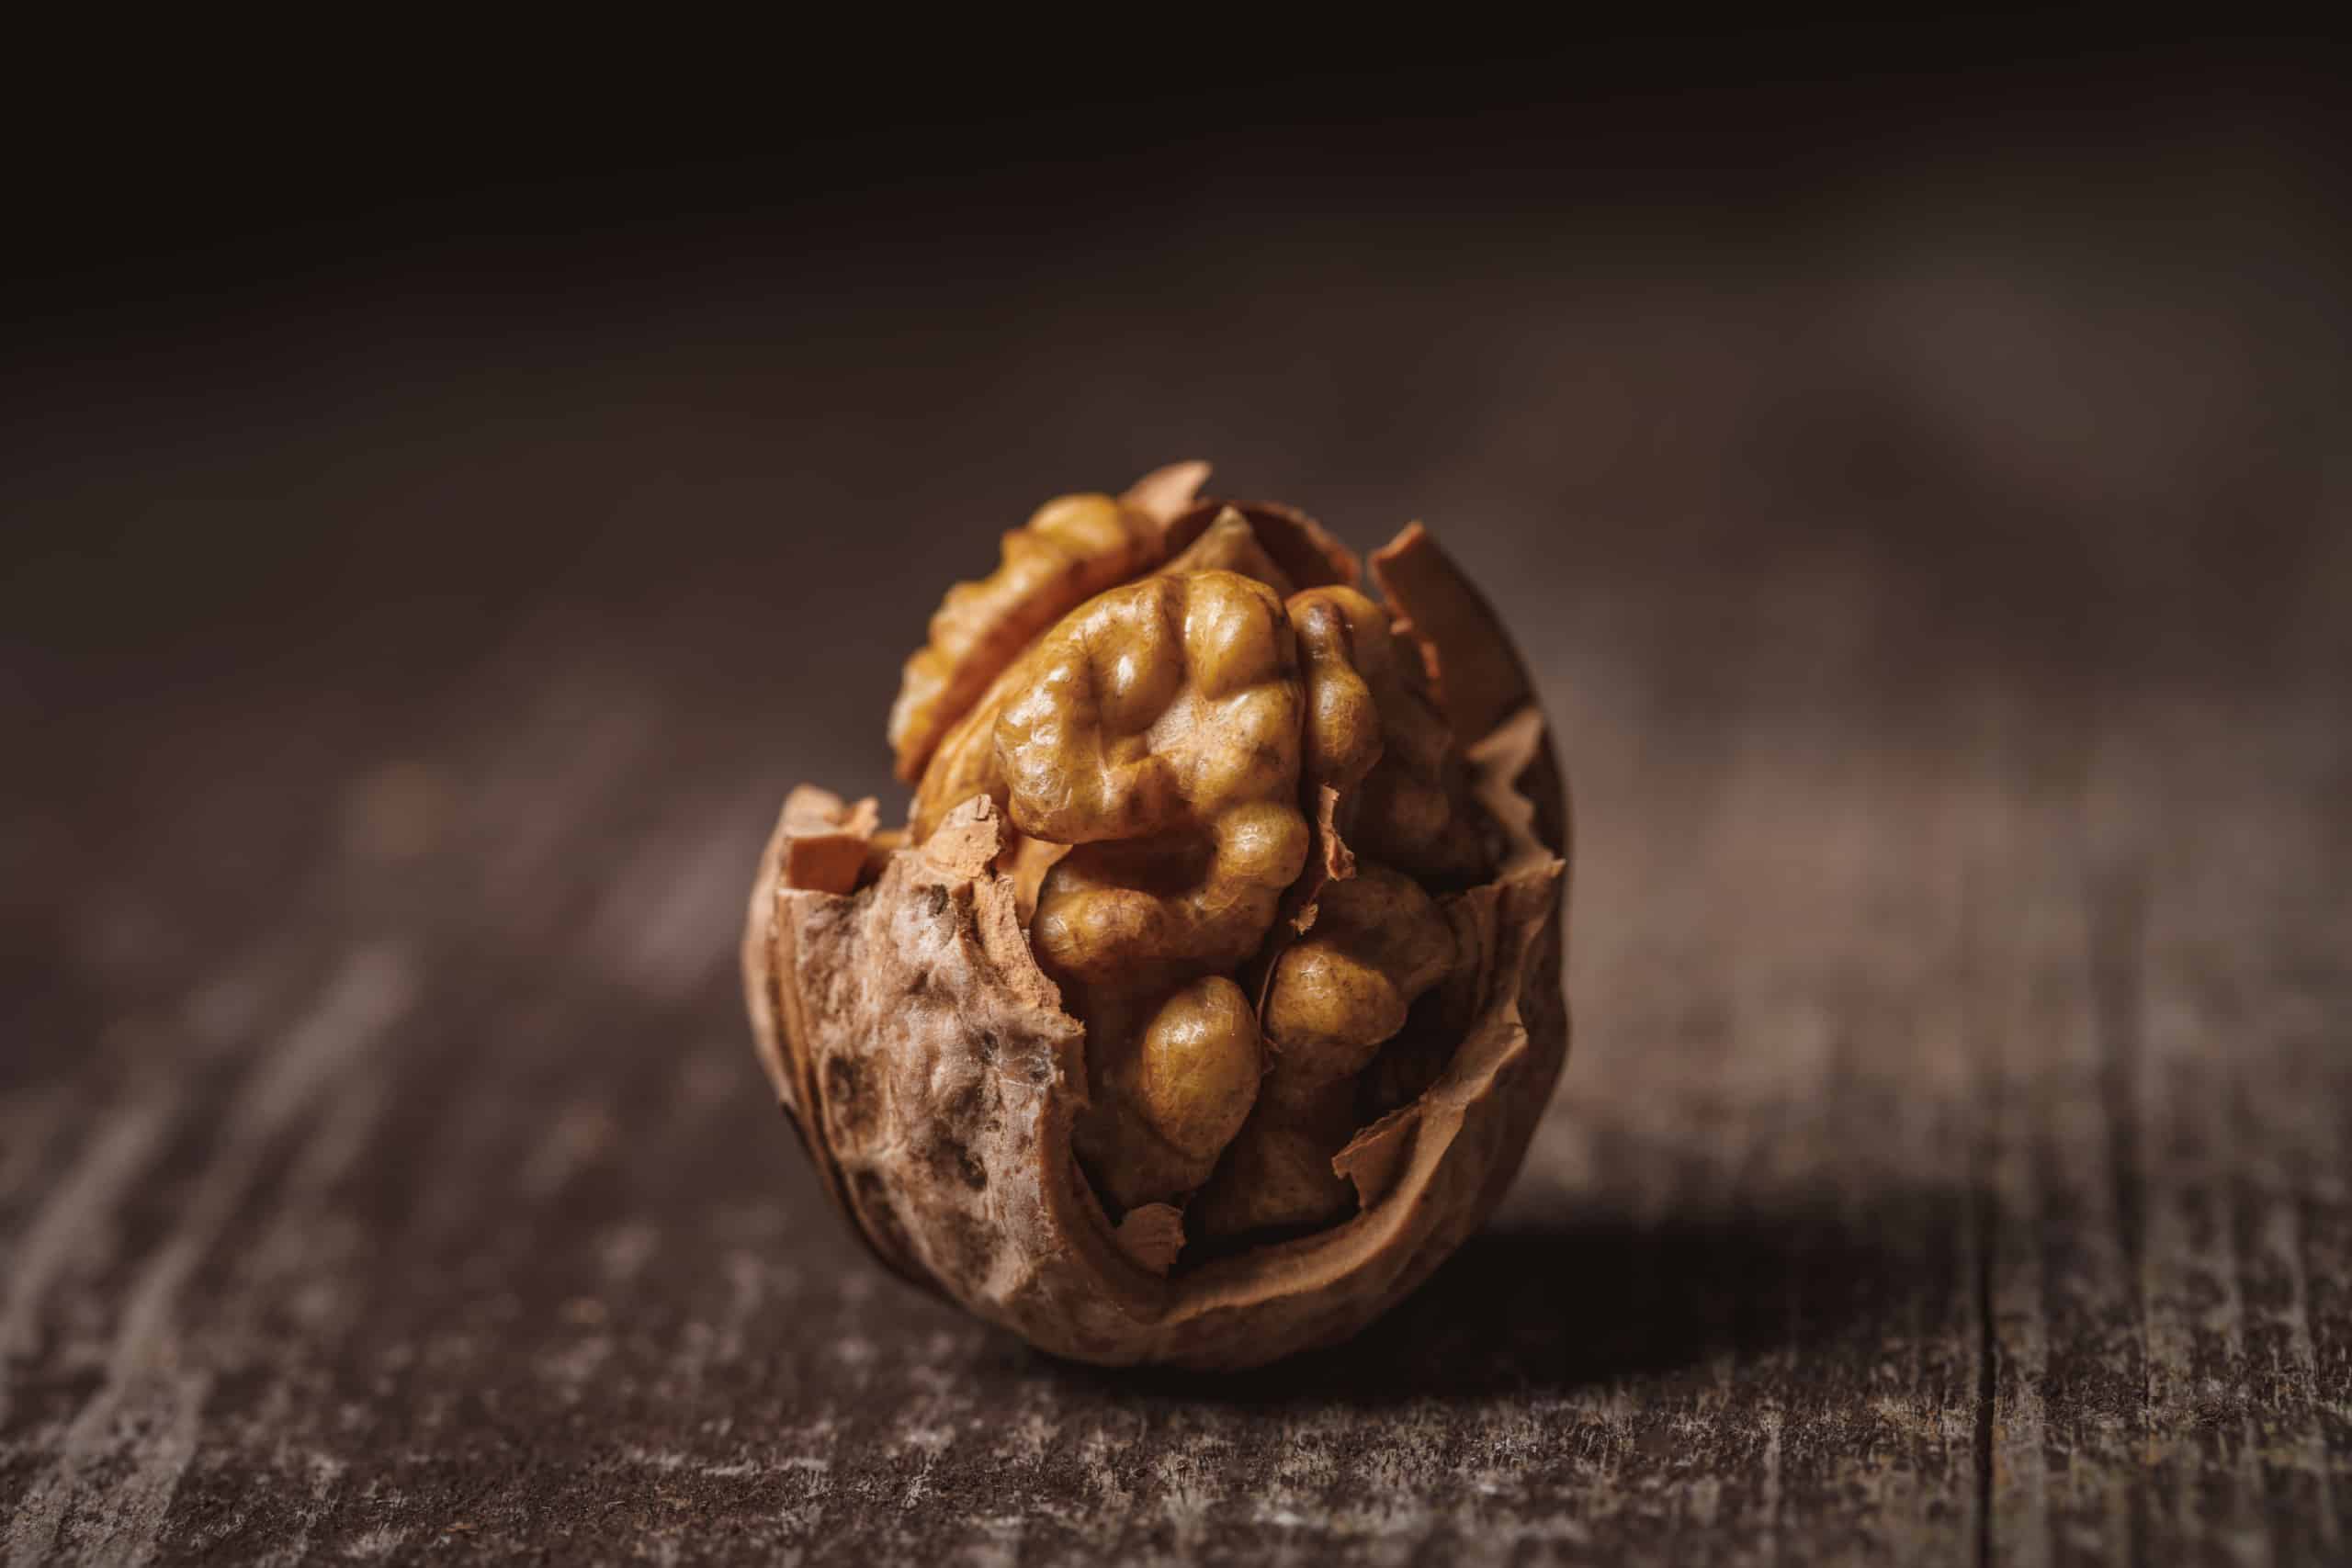 This beauty of a half opened walnut sits on a wooden table in our Walnut Calories blog post.